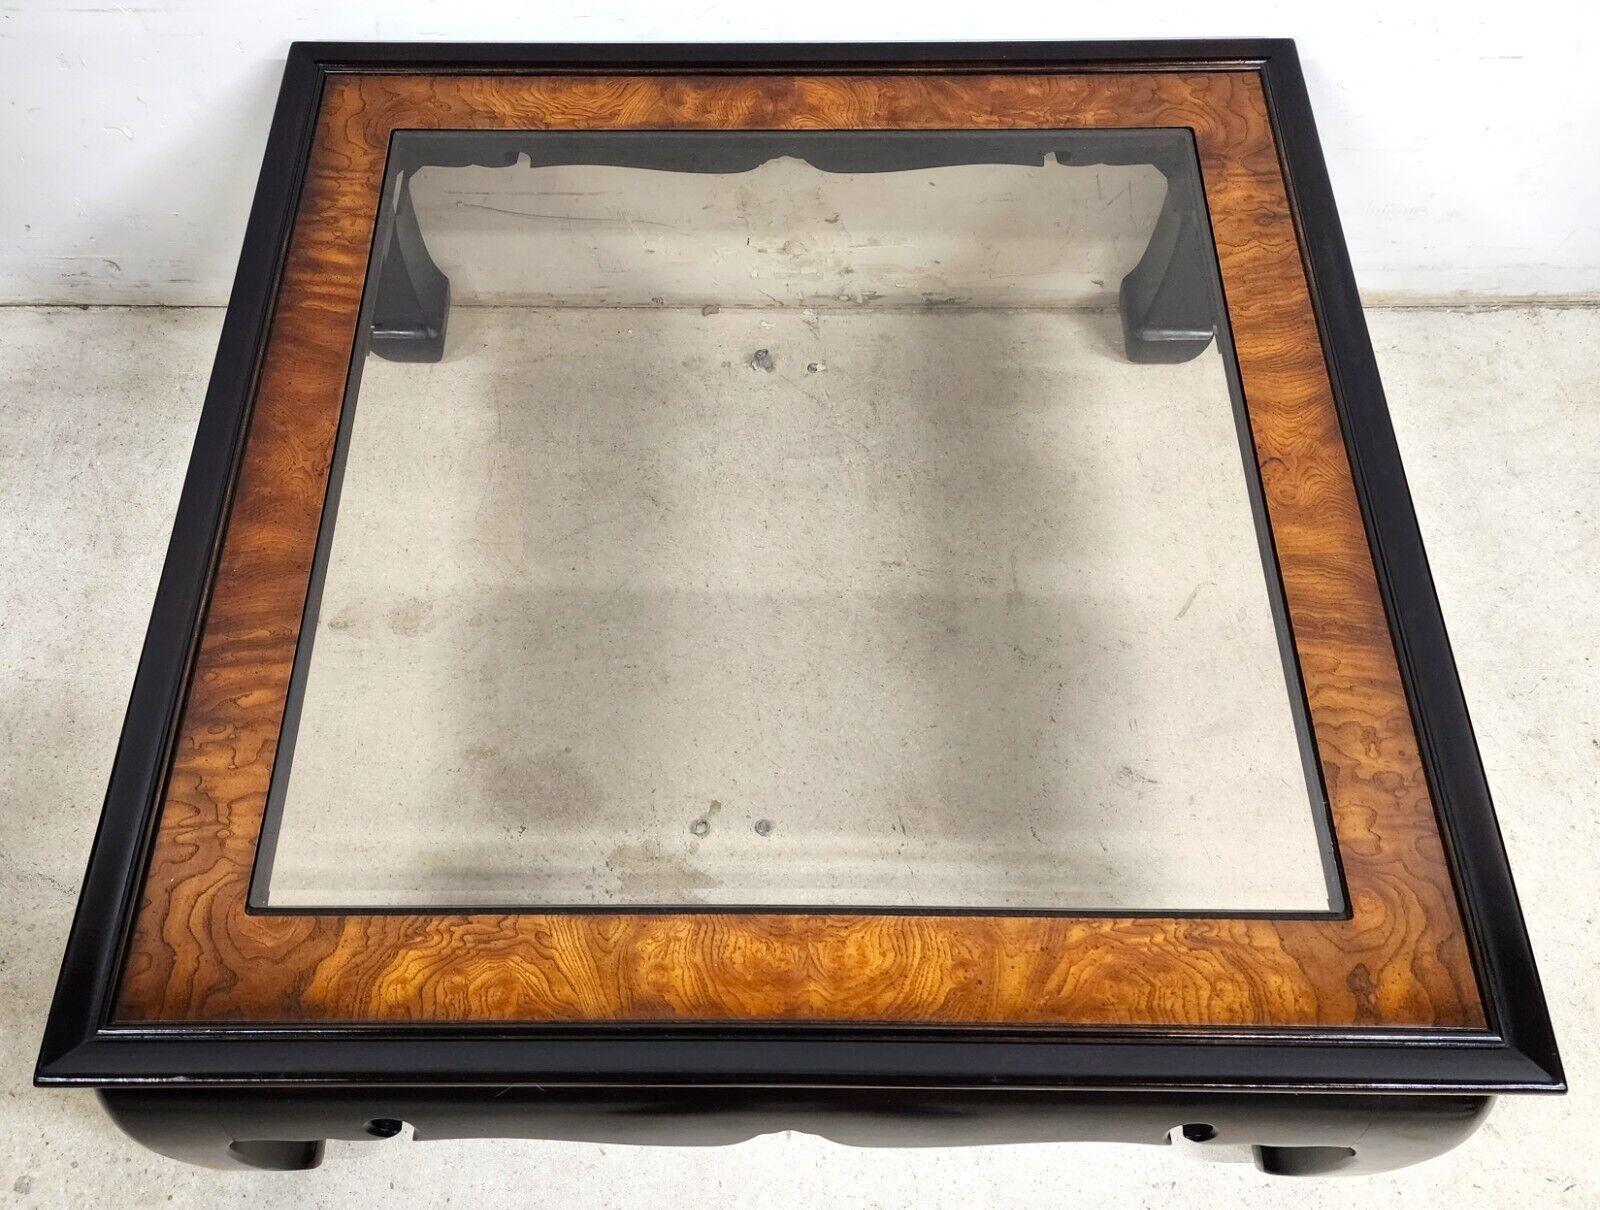 For FULL item description click on CONTINUE READING at the bottom of this page.
Offering One Of Our Recent Palm Beach Estate Fine Furniture Acquisitions Of A
Vintage Asian Opium Ming-Style Solid Wood Coffee Table 

Approximate Measurements in